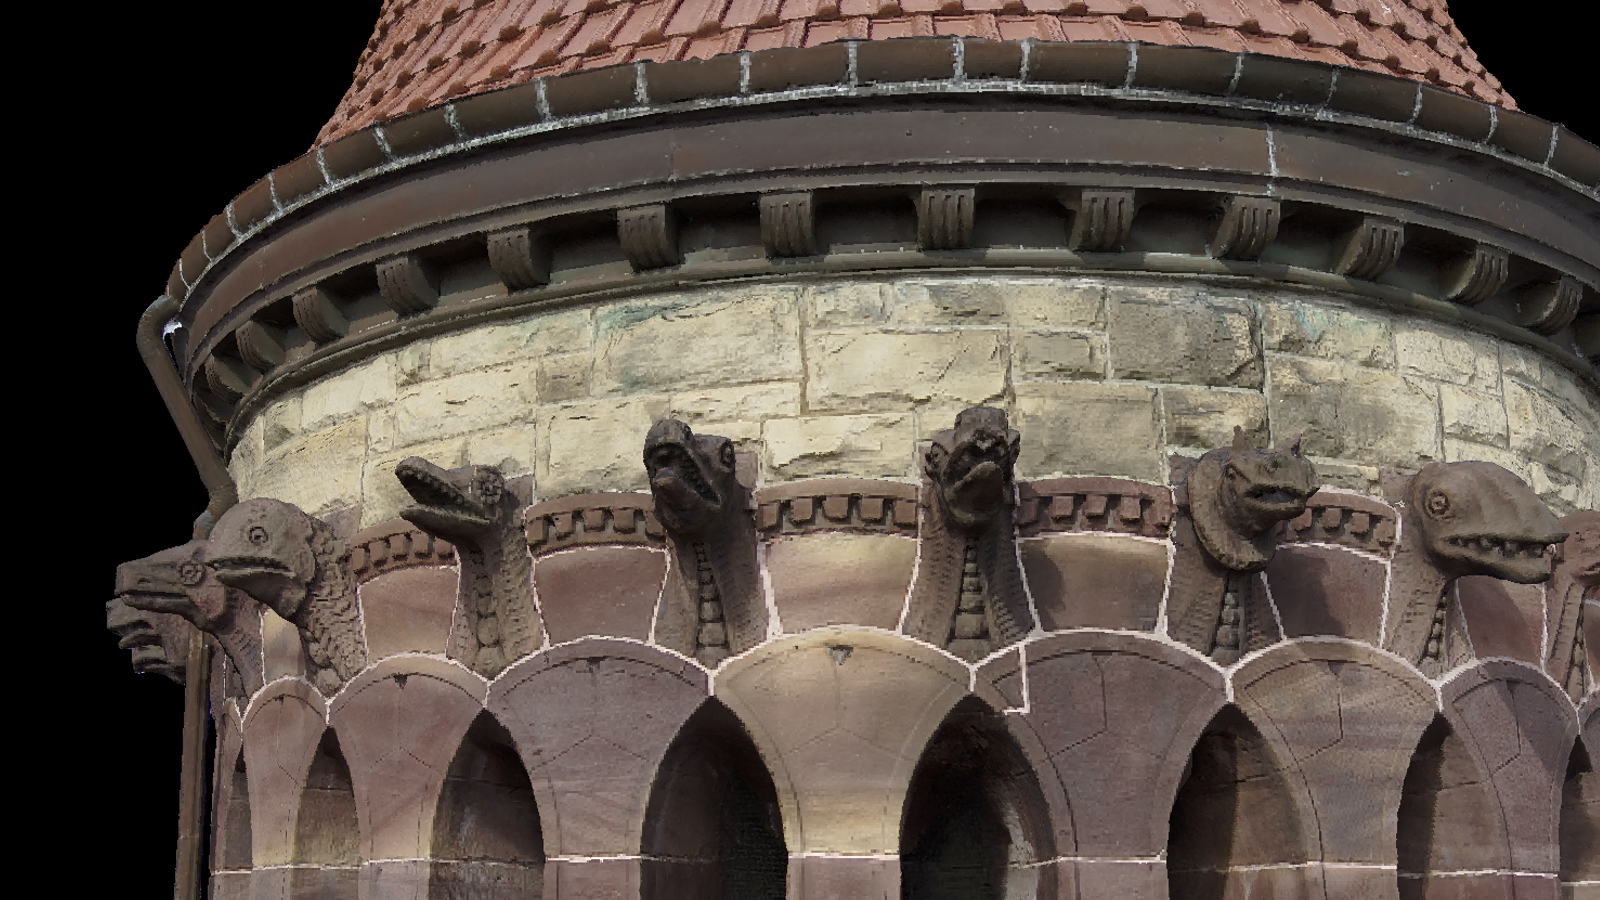 Grotesques - tower of Orton Hall